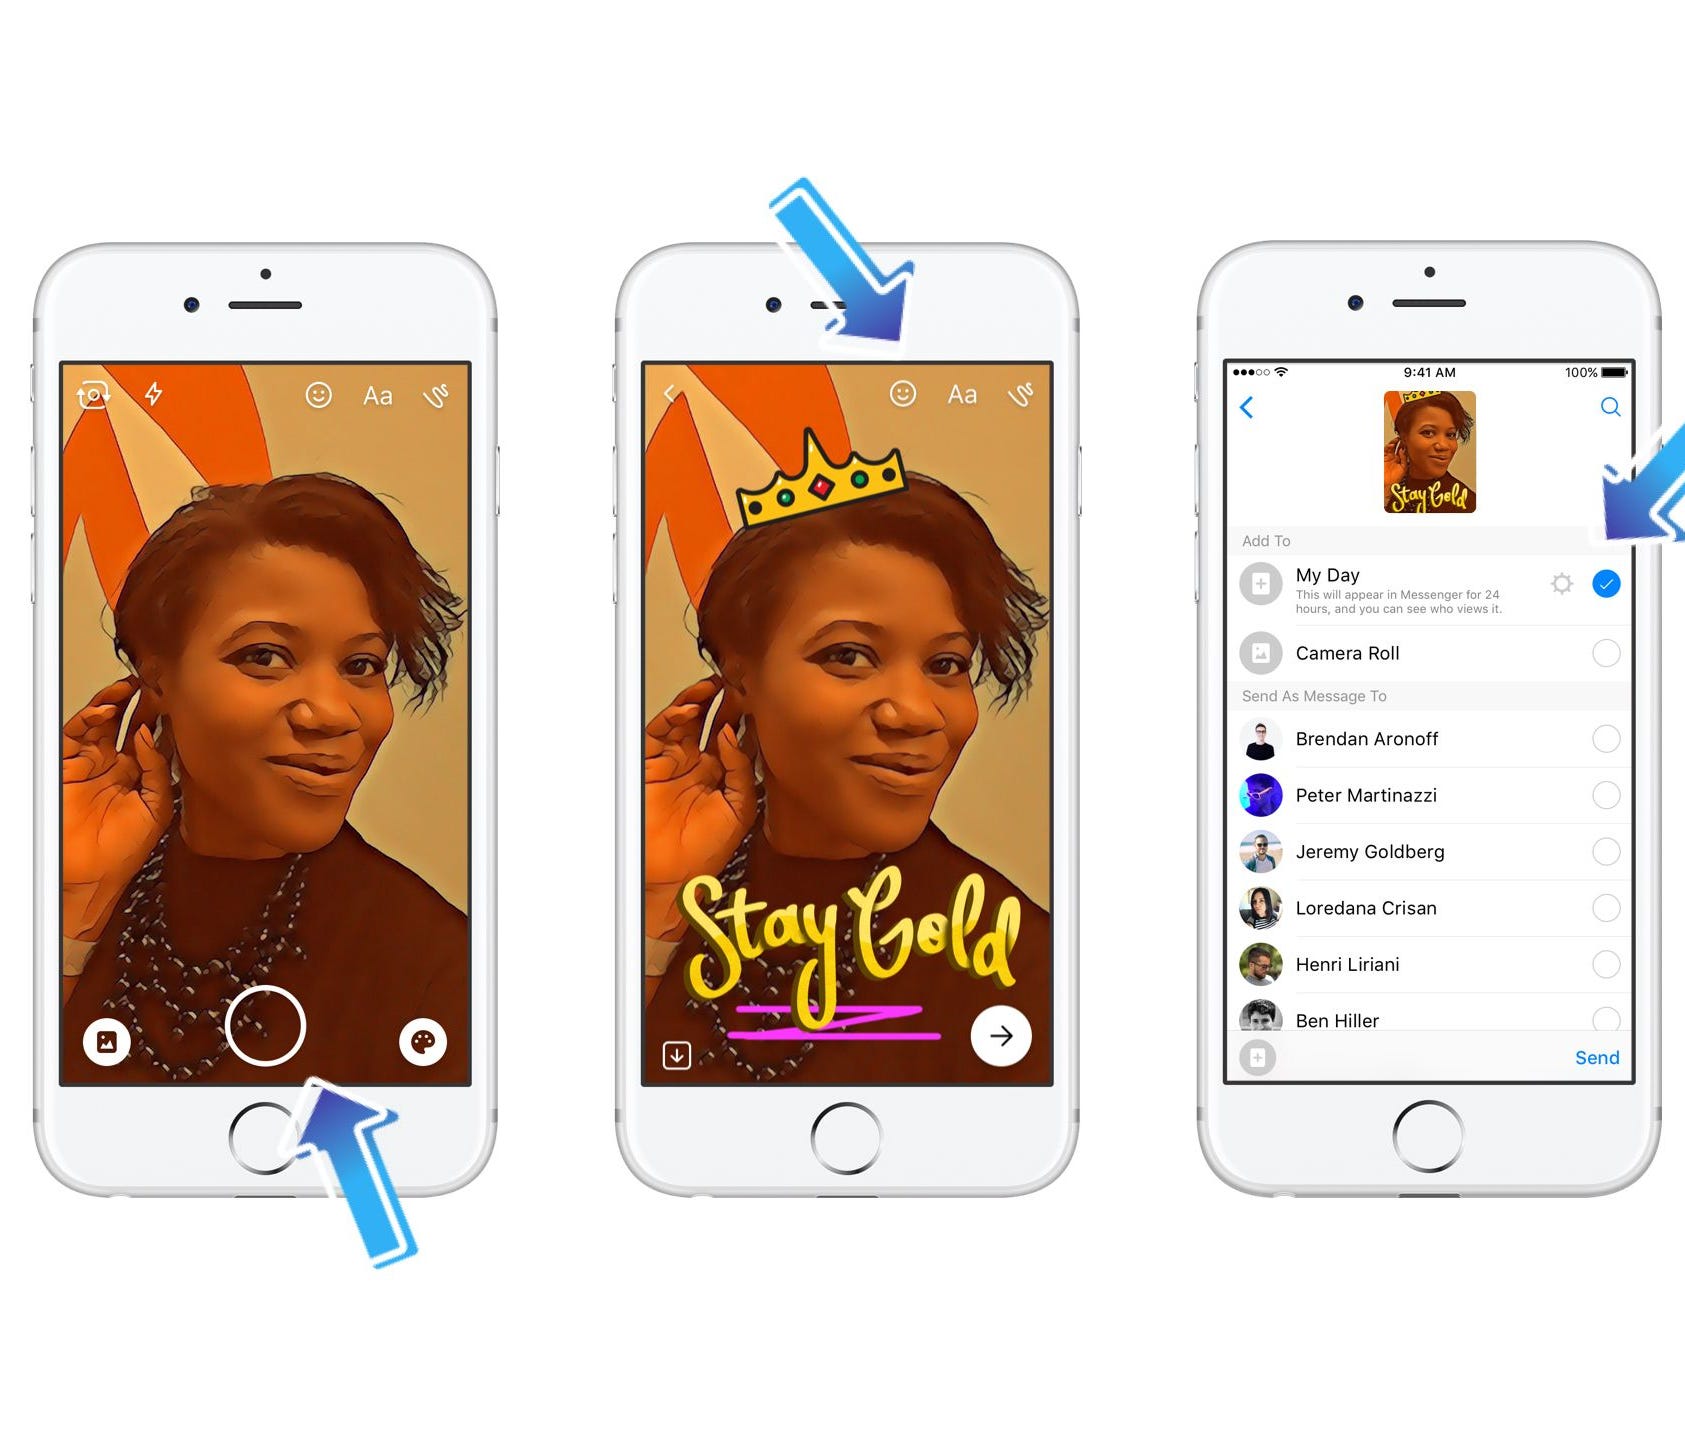 Facebook Messenger is rolling out its version of Snapchat's Stories feature. It's called Messenger Day.